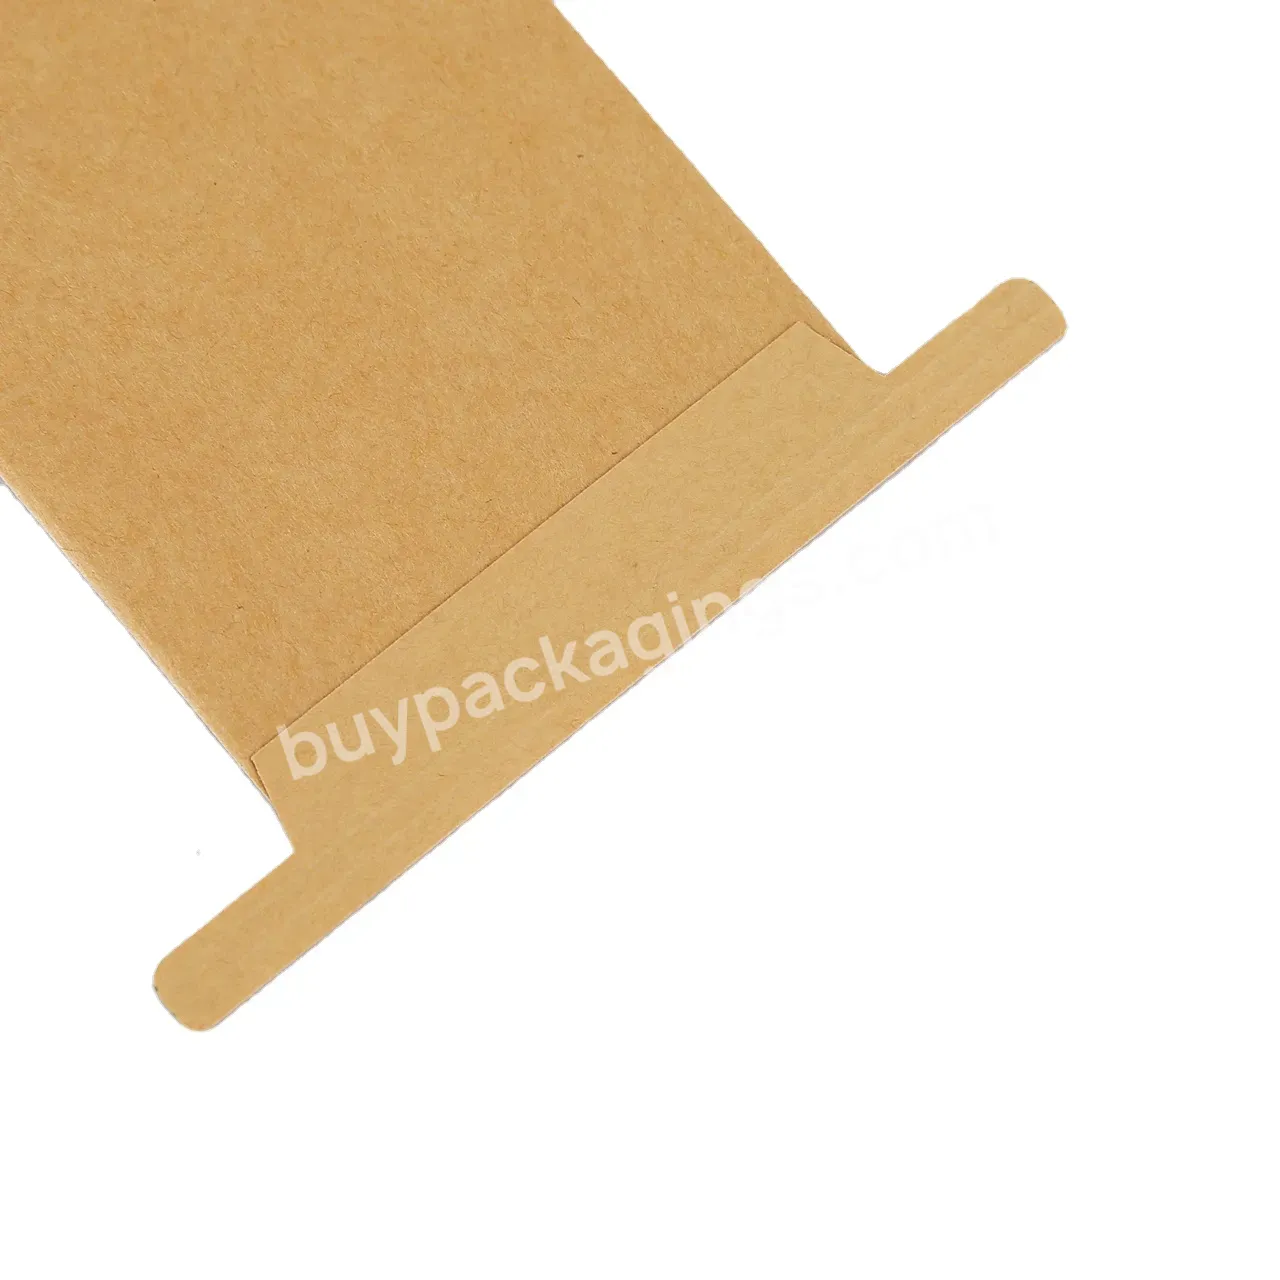 Factory Outlet Wholesale Stock Recyclable Kraft Paper Envelopes With Iron Wire Seal - Buy Kraft Paper Envelopes,Kraft Paper Envelopes With Iron Wire Seal,Wholesale Stock Paper Envelopes.